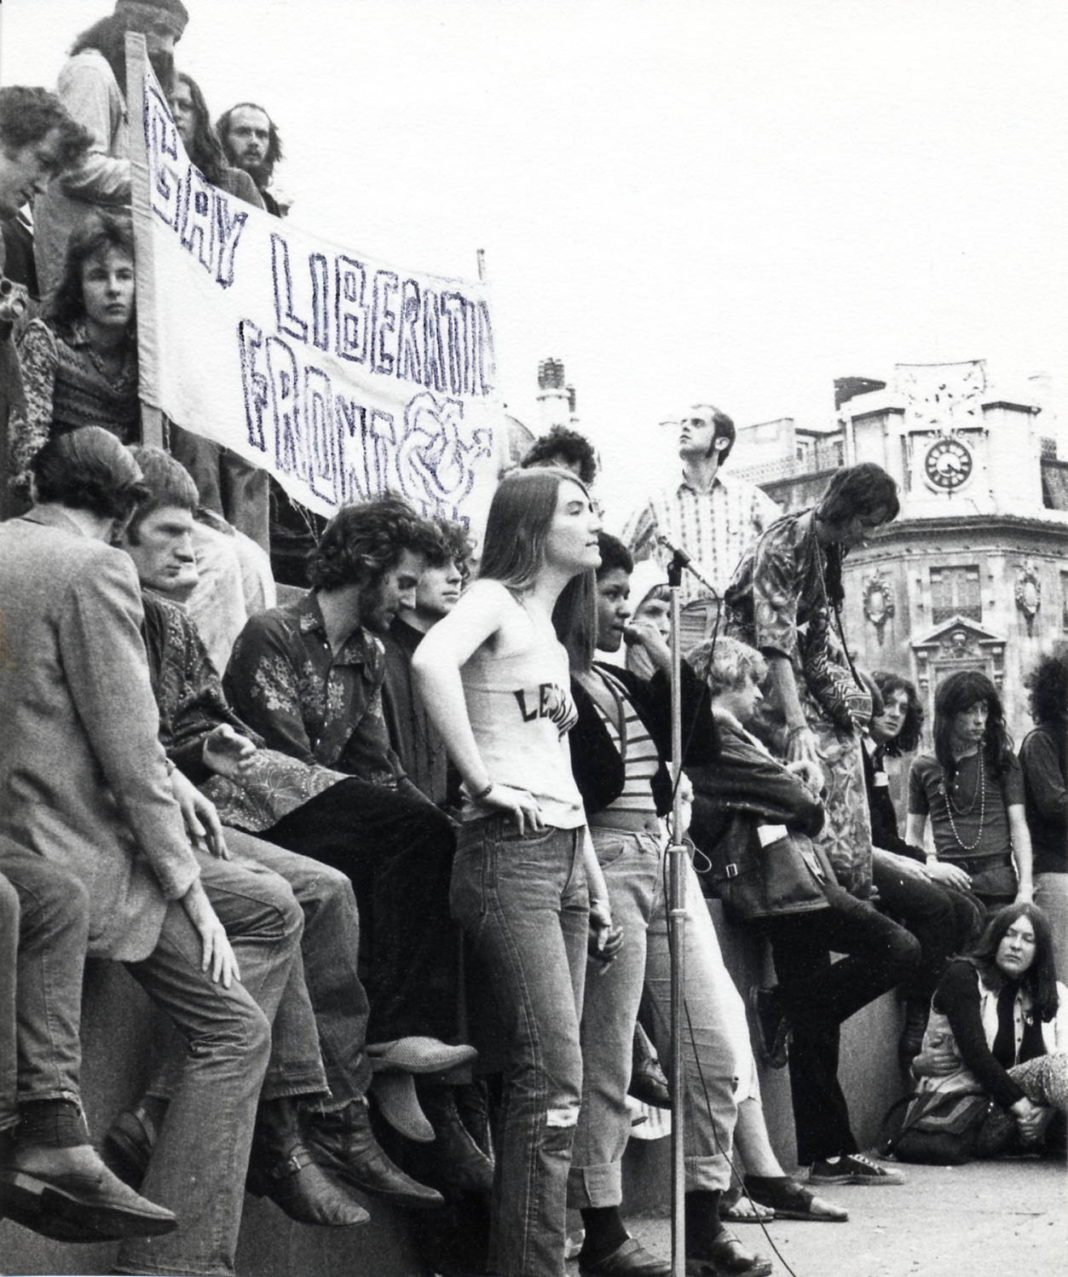 A photo of the Gay Liberation Front of which Rachel Pollack was a founding member